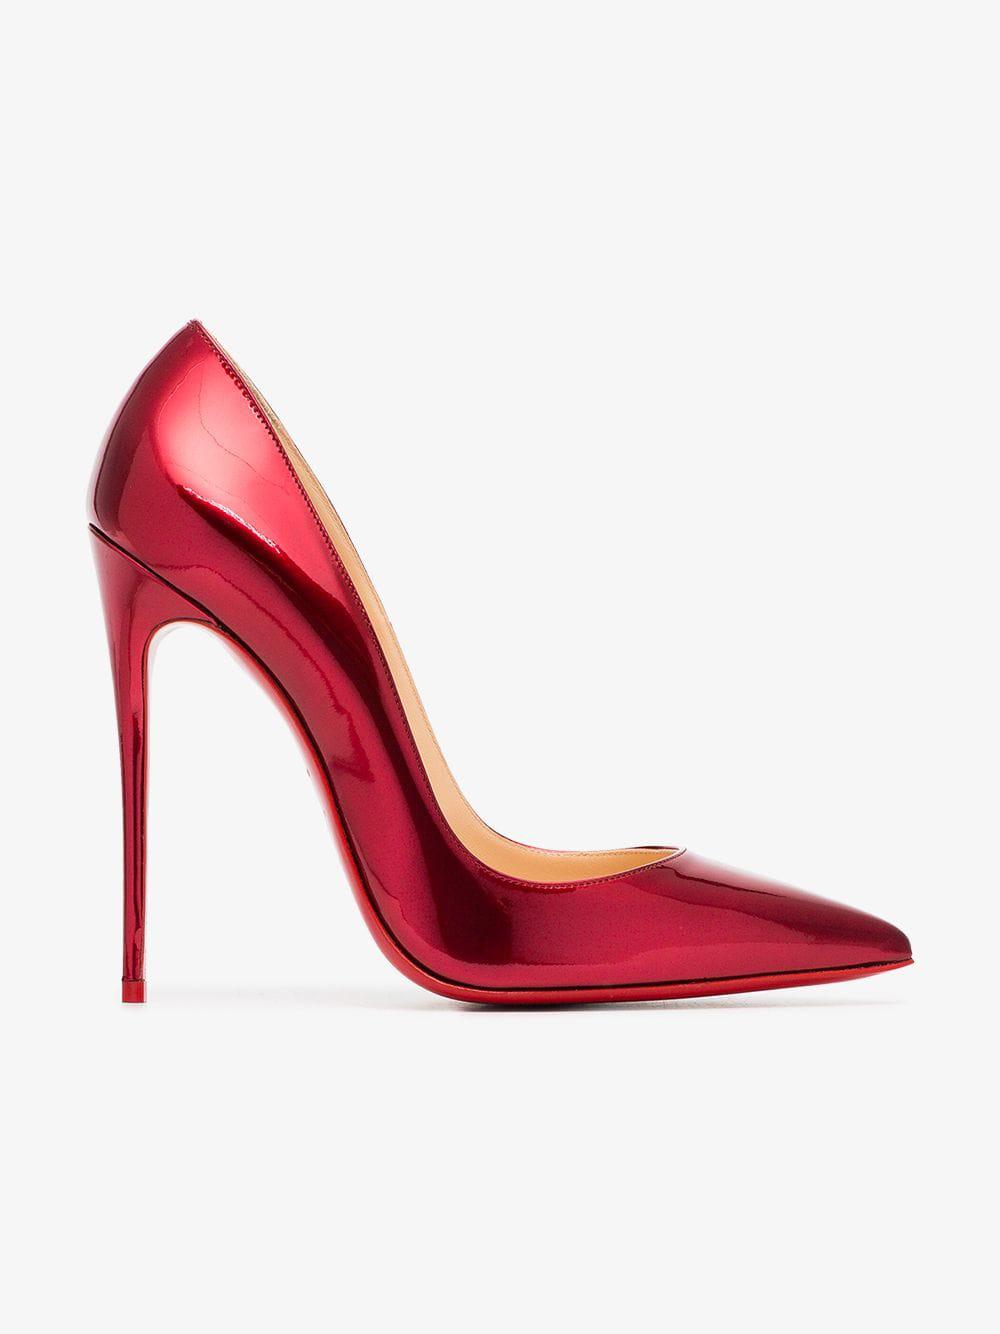 Christian Louboutin Metallic Red Kate Patent Leather Pumps |